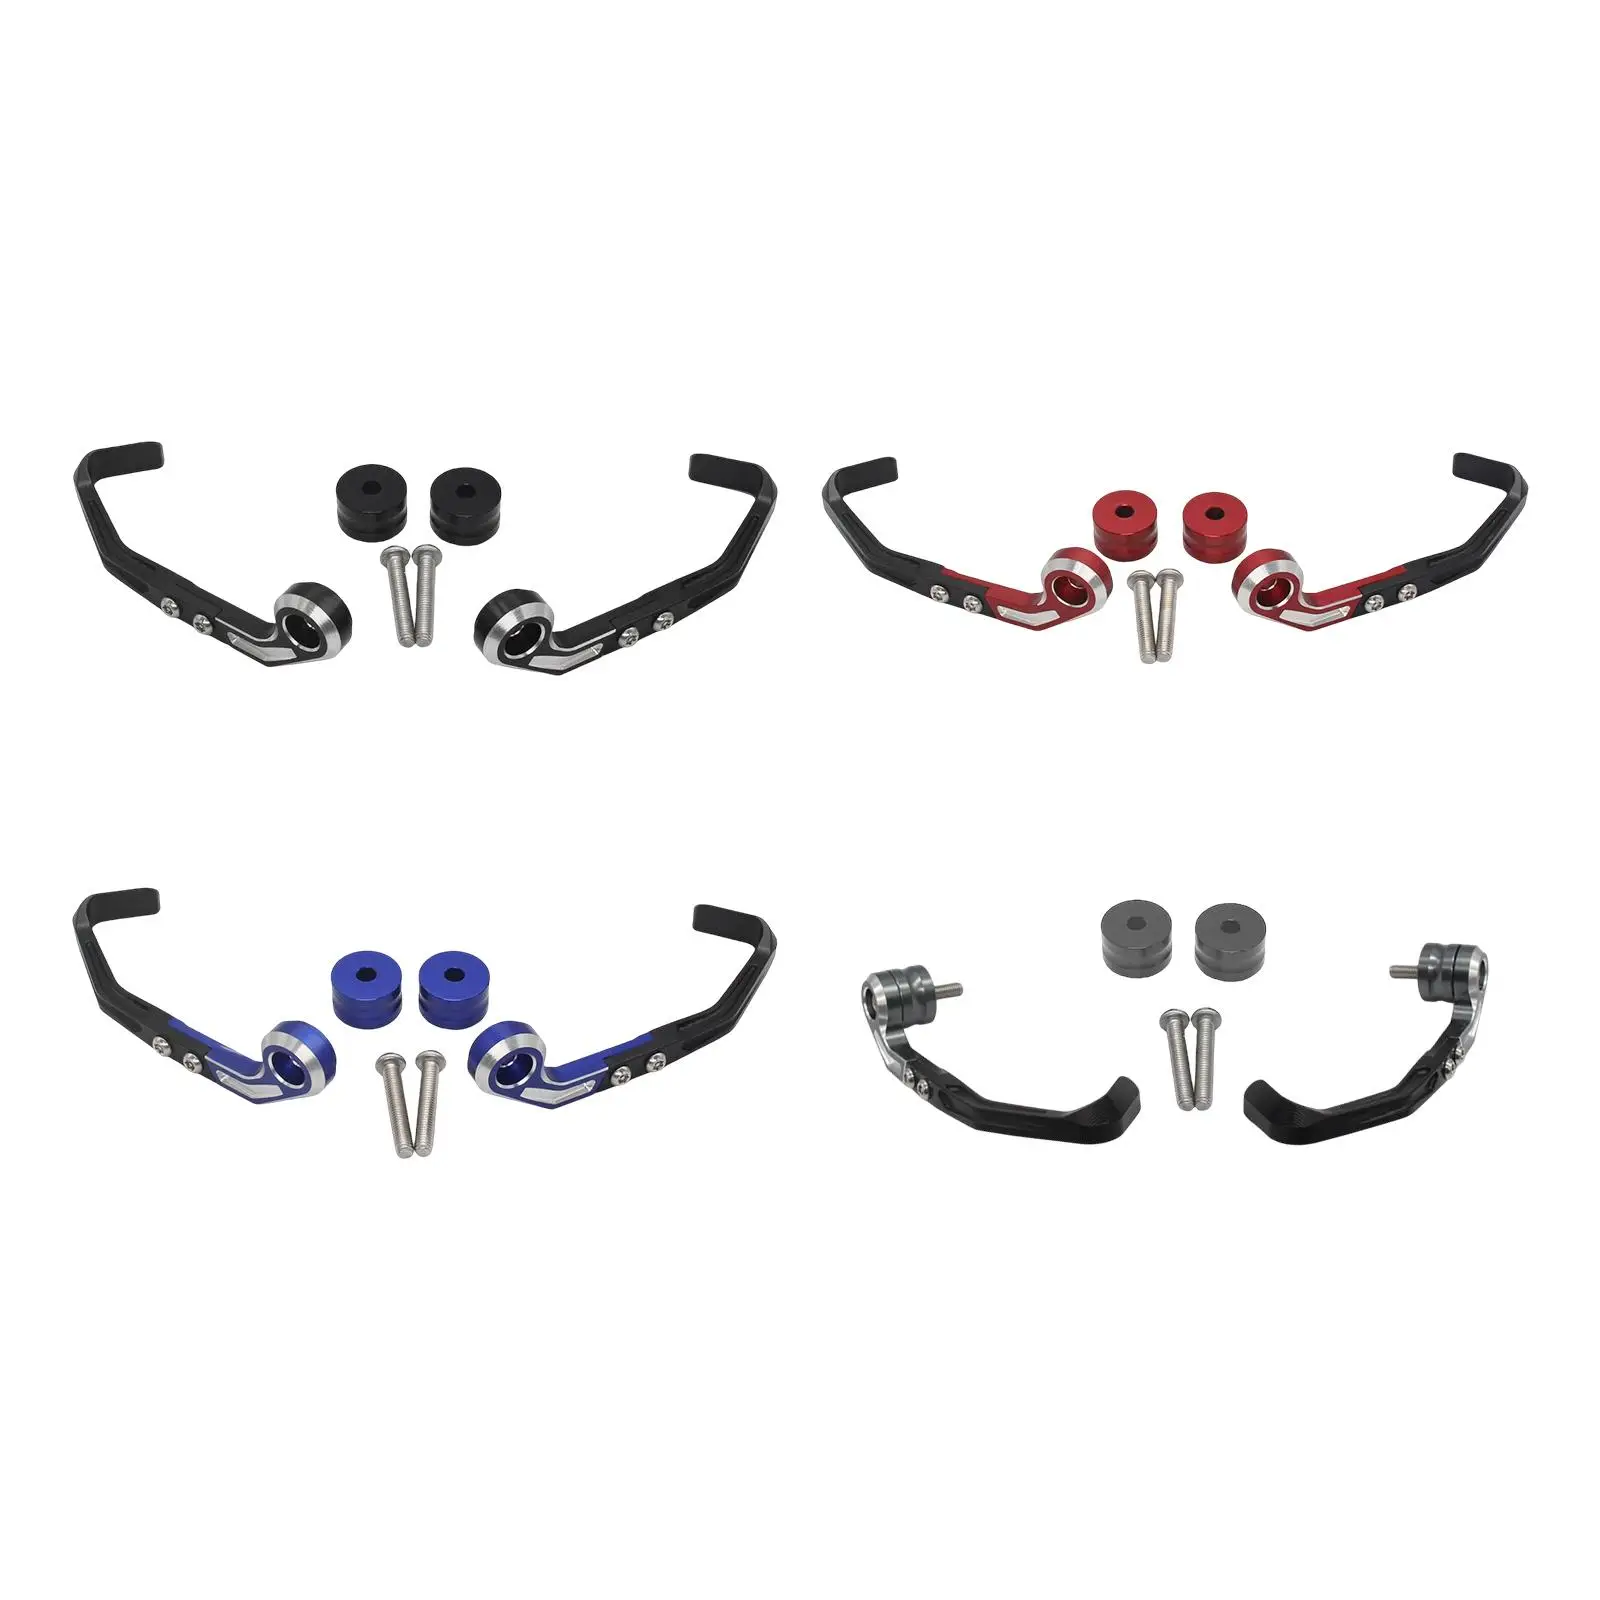 Motorcycle Brake Clutch Lever Guards Aluminum Alloy protect guards for  S1000R S1000R Direct Replaces Parts Accessories